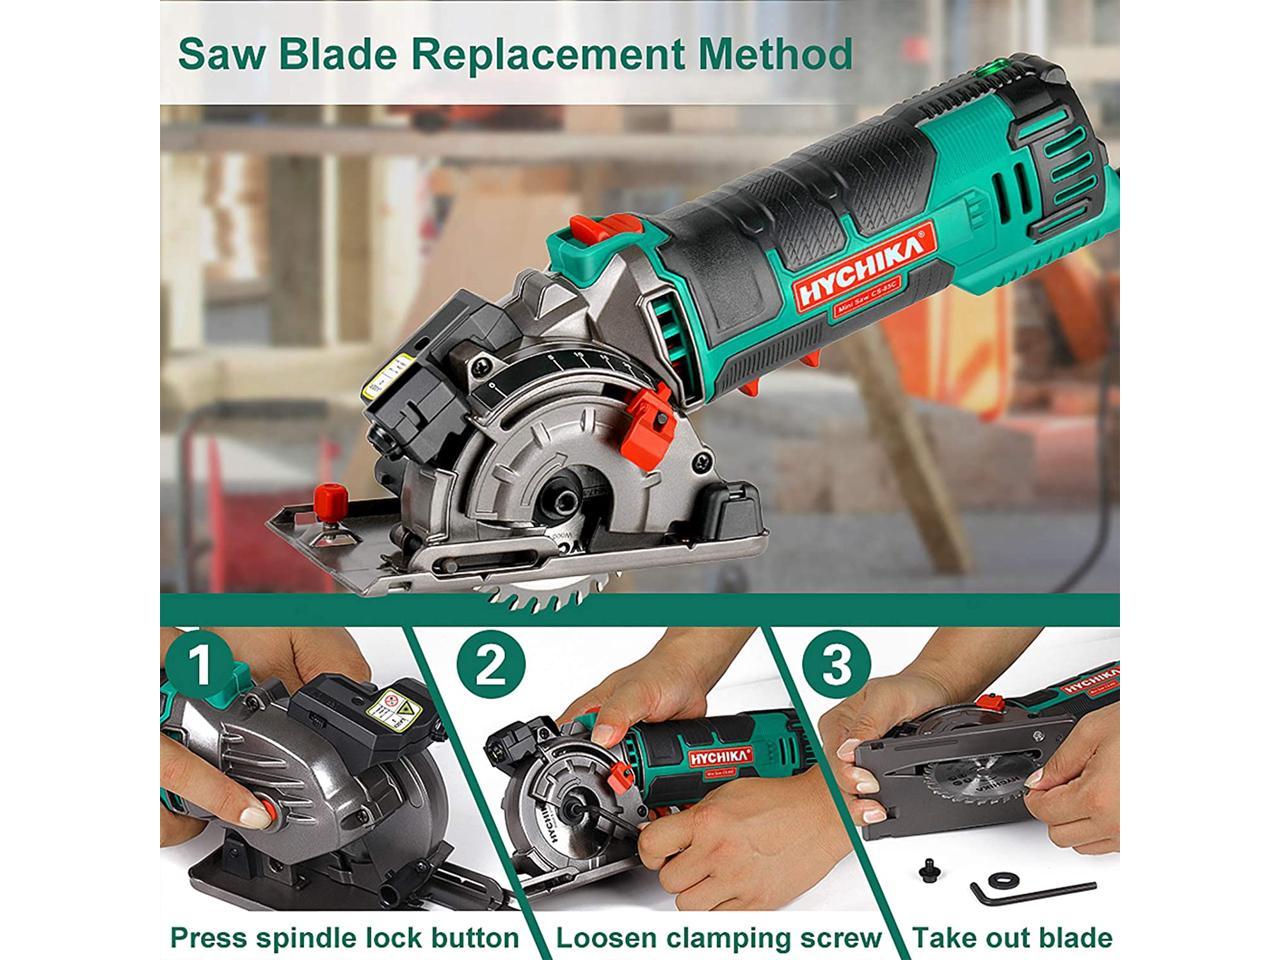 Mini Circular Saw, HYCHIKA Compact Circular Saw Tile Saw with 3 Saw Blades  4A Pure Copper Motor, 3-3/8”4500RPM Ideal for Wood, Soft Metal, Tile and 